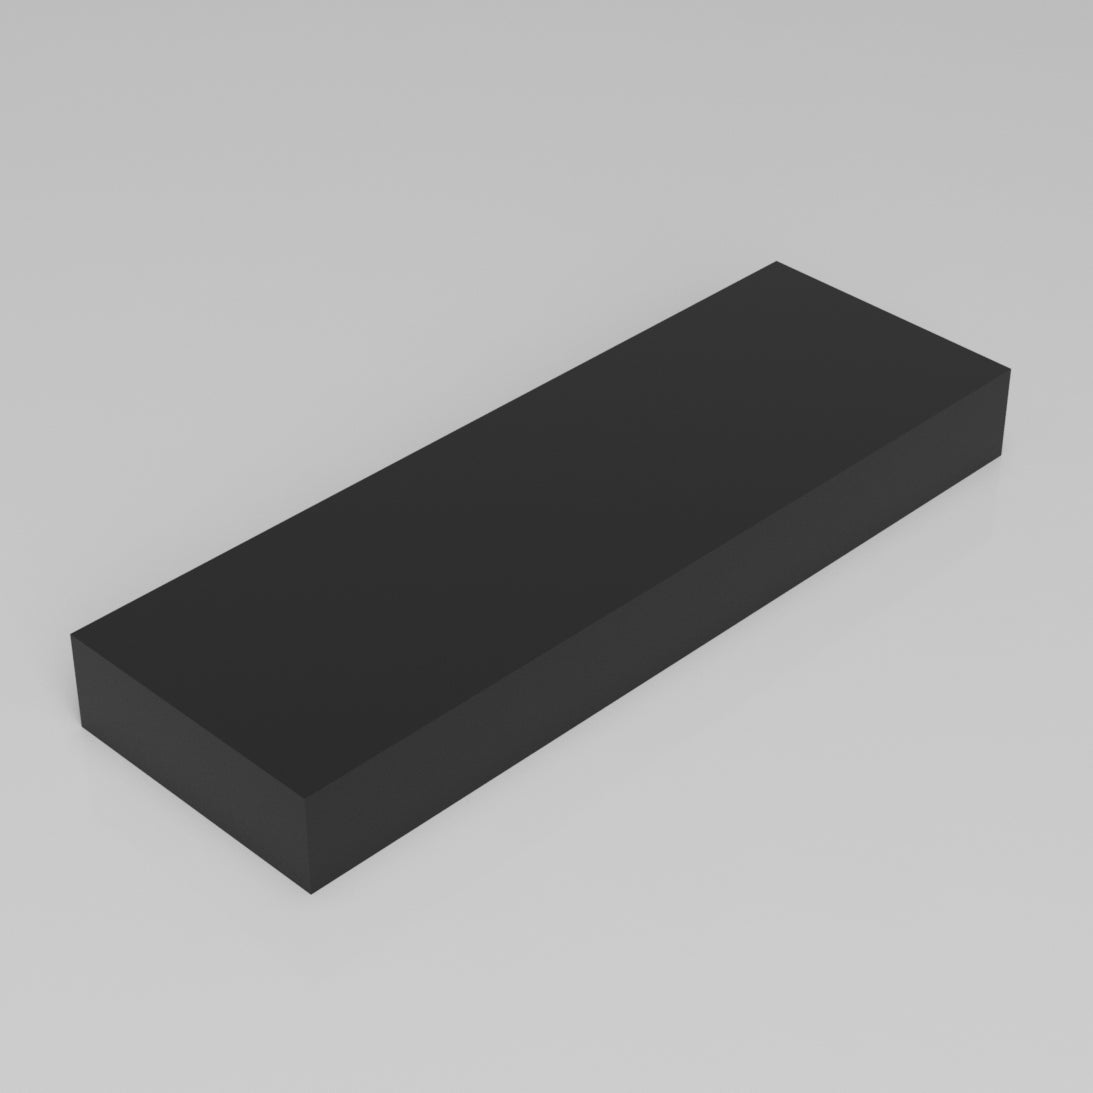 Machinable Wax Rectangular Block Front View 2 Inch by 6 Inch by 18 Inch